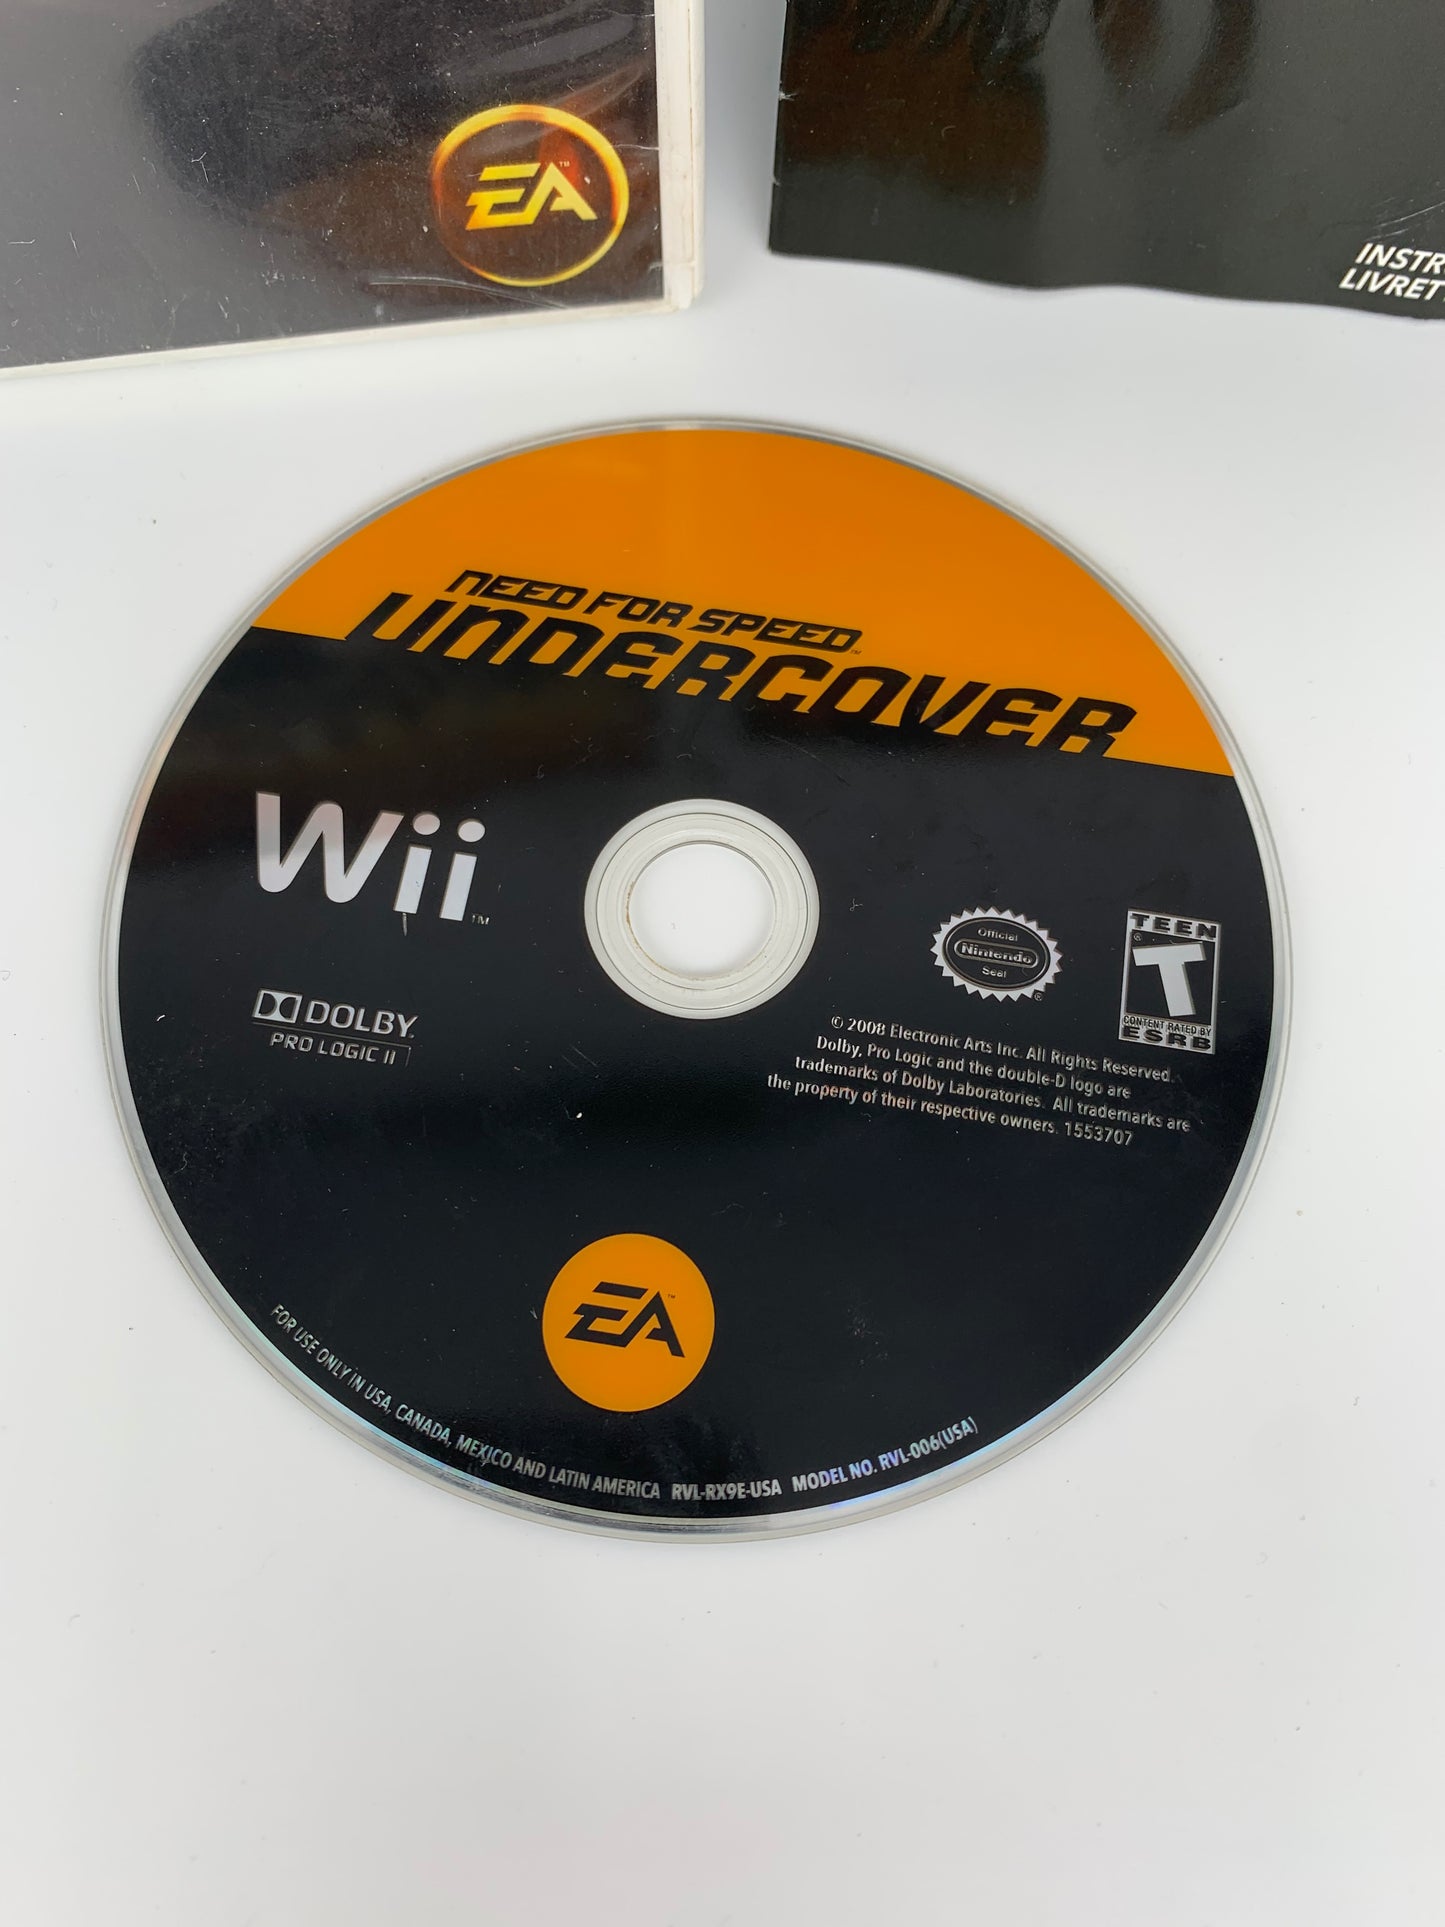 NiNTENDO Wii | NEED FOR SPEED UNDERCOVER